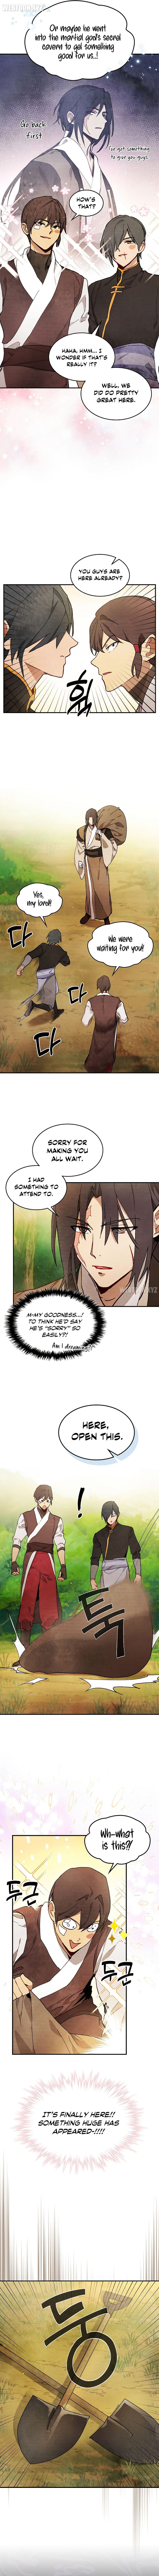 chronicles-of-the-martial-gods-return-chap-41-4